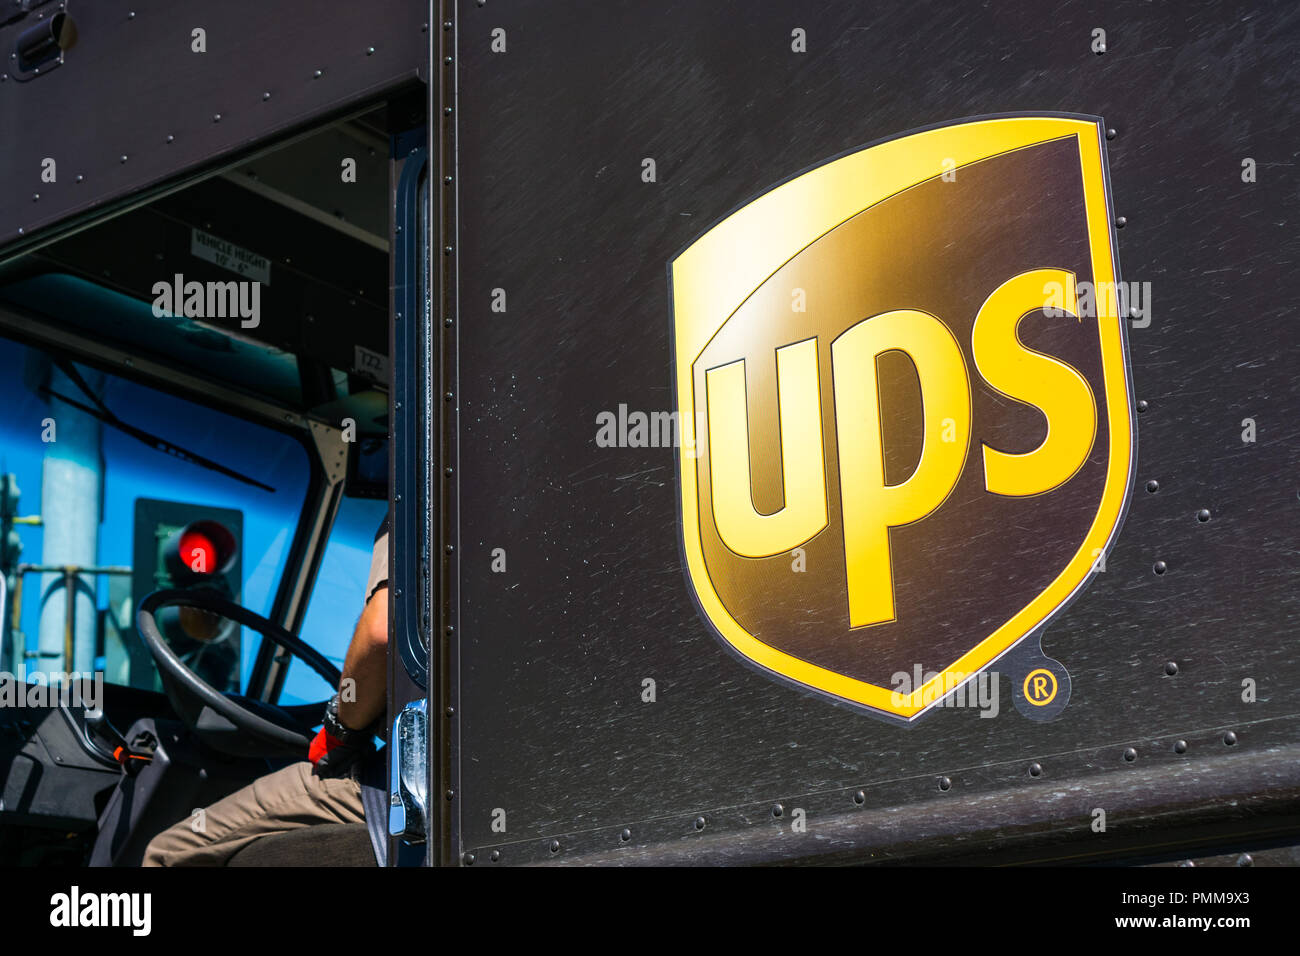 Ups Logo High Resolution Stock Photography and Images - Alamy